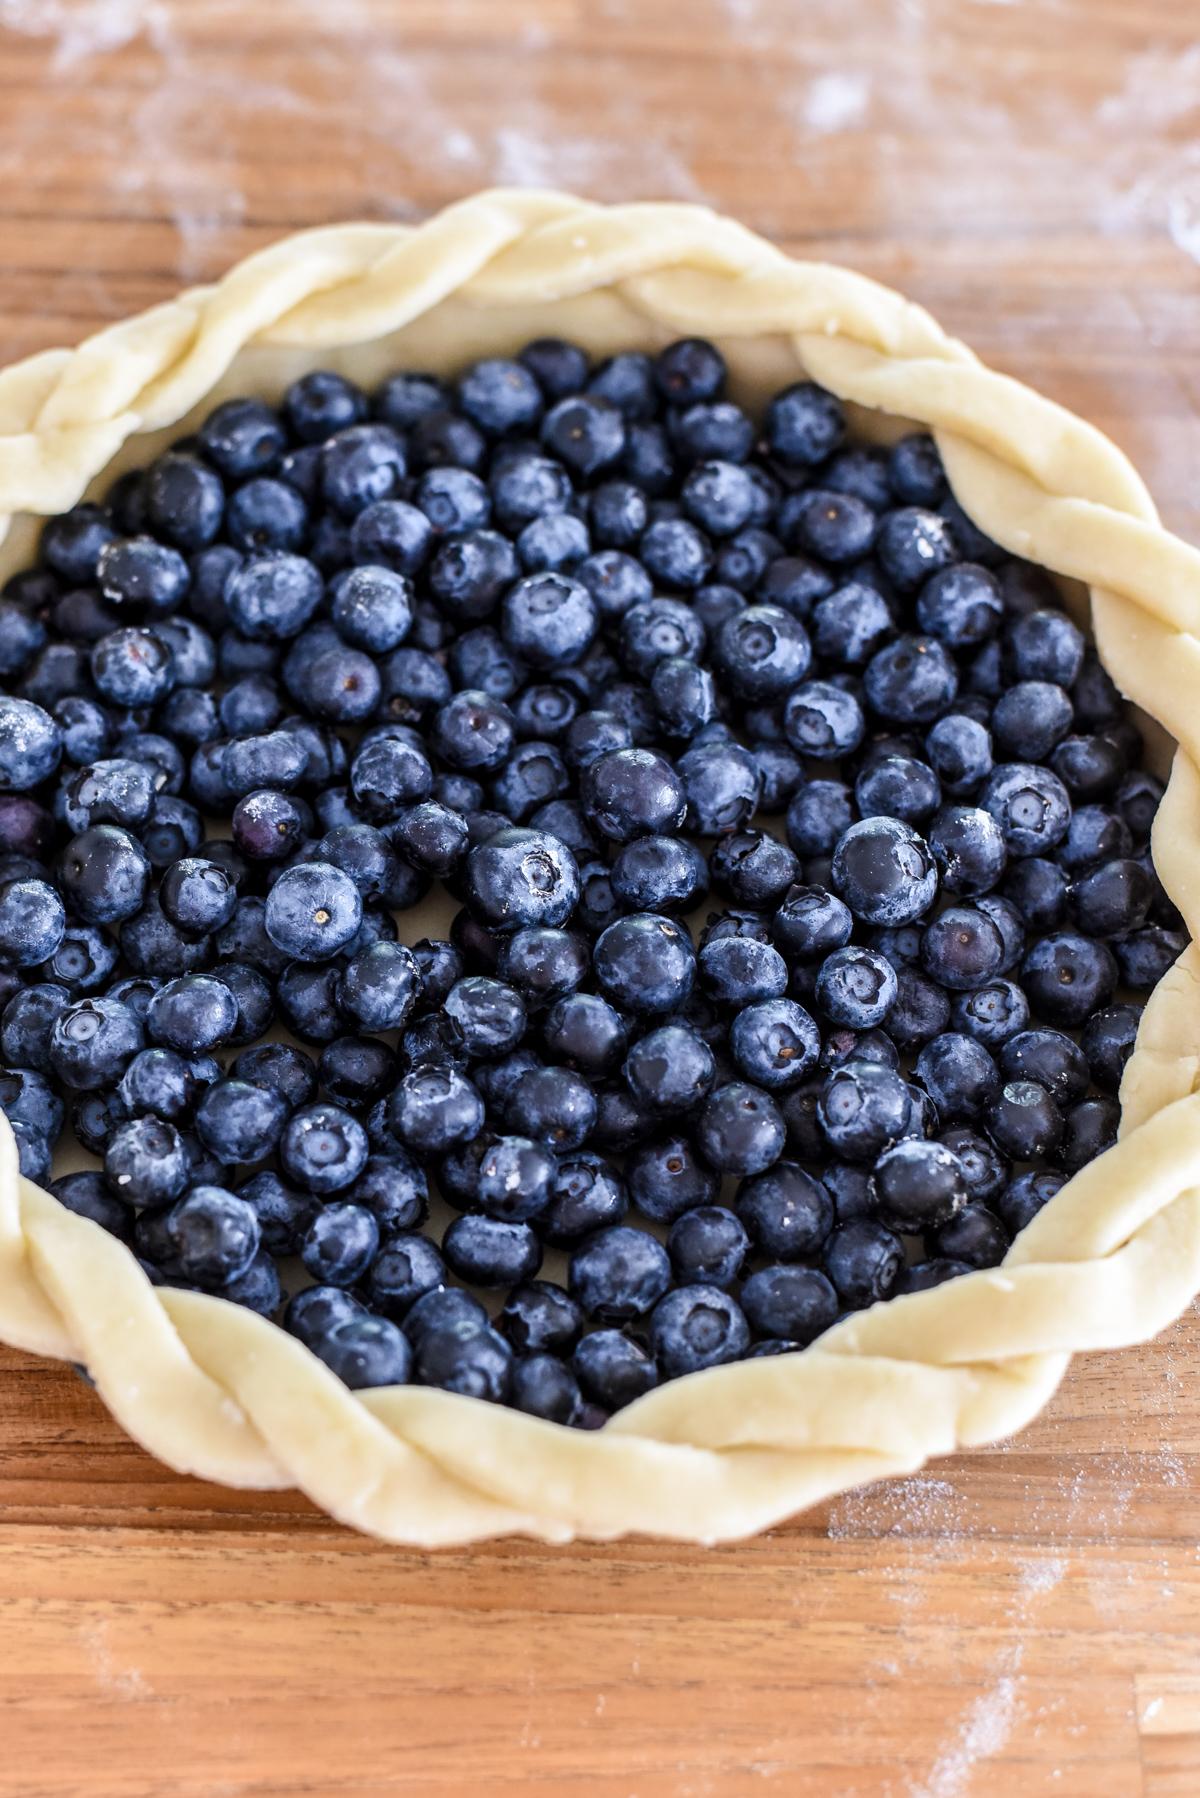 Transfer the rolled-out crust to the tart pan and evenly scatter with blueberries. (Audrey Le Goff)